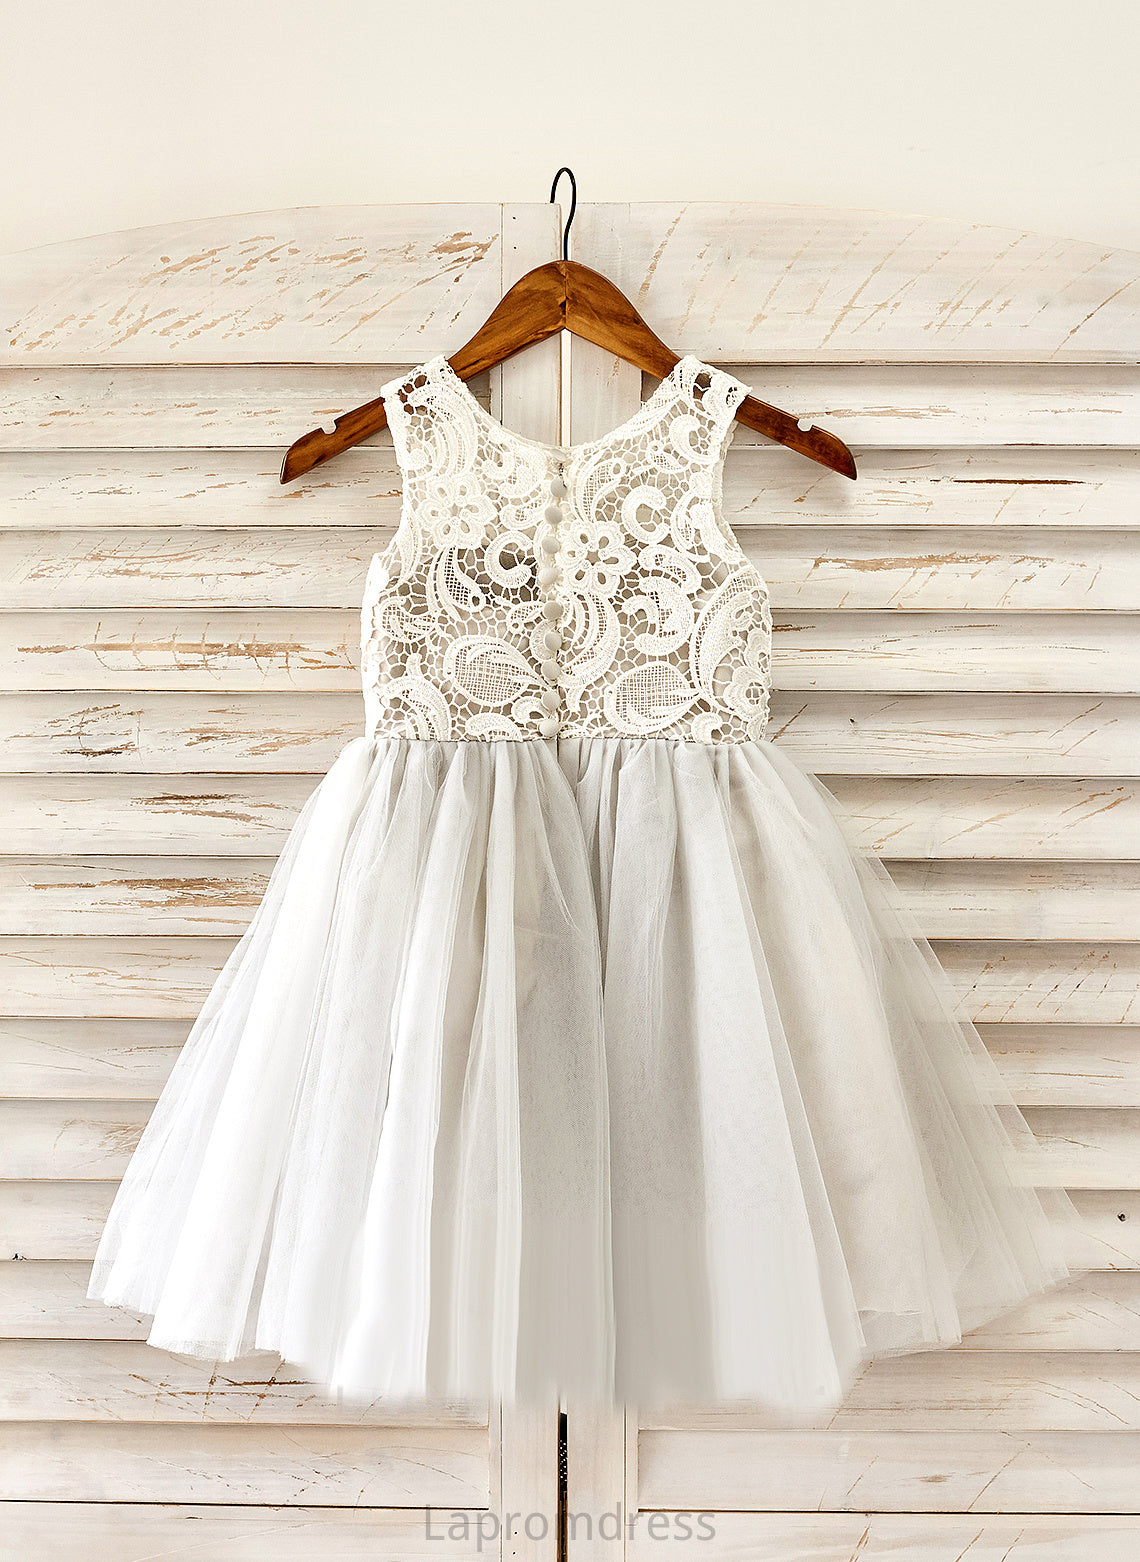 Sleeveless Scoop - Tulle Lilia With Neck Lace Dress A-Line Girl Flower Girl Dresses Knee-length Flower